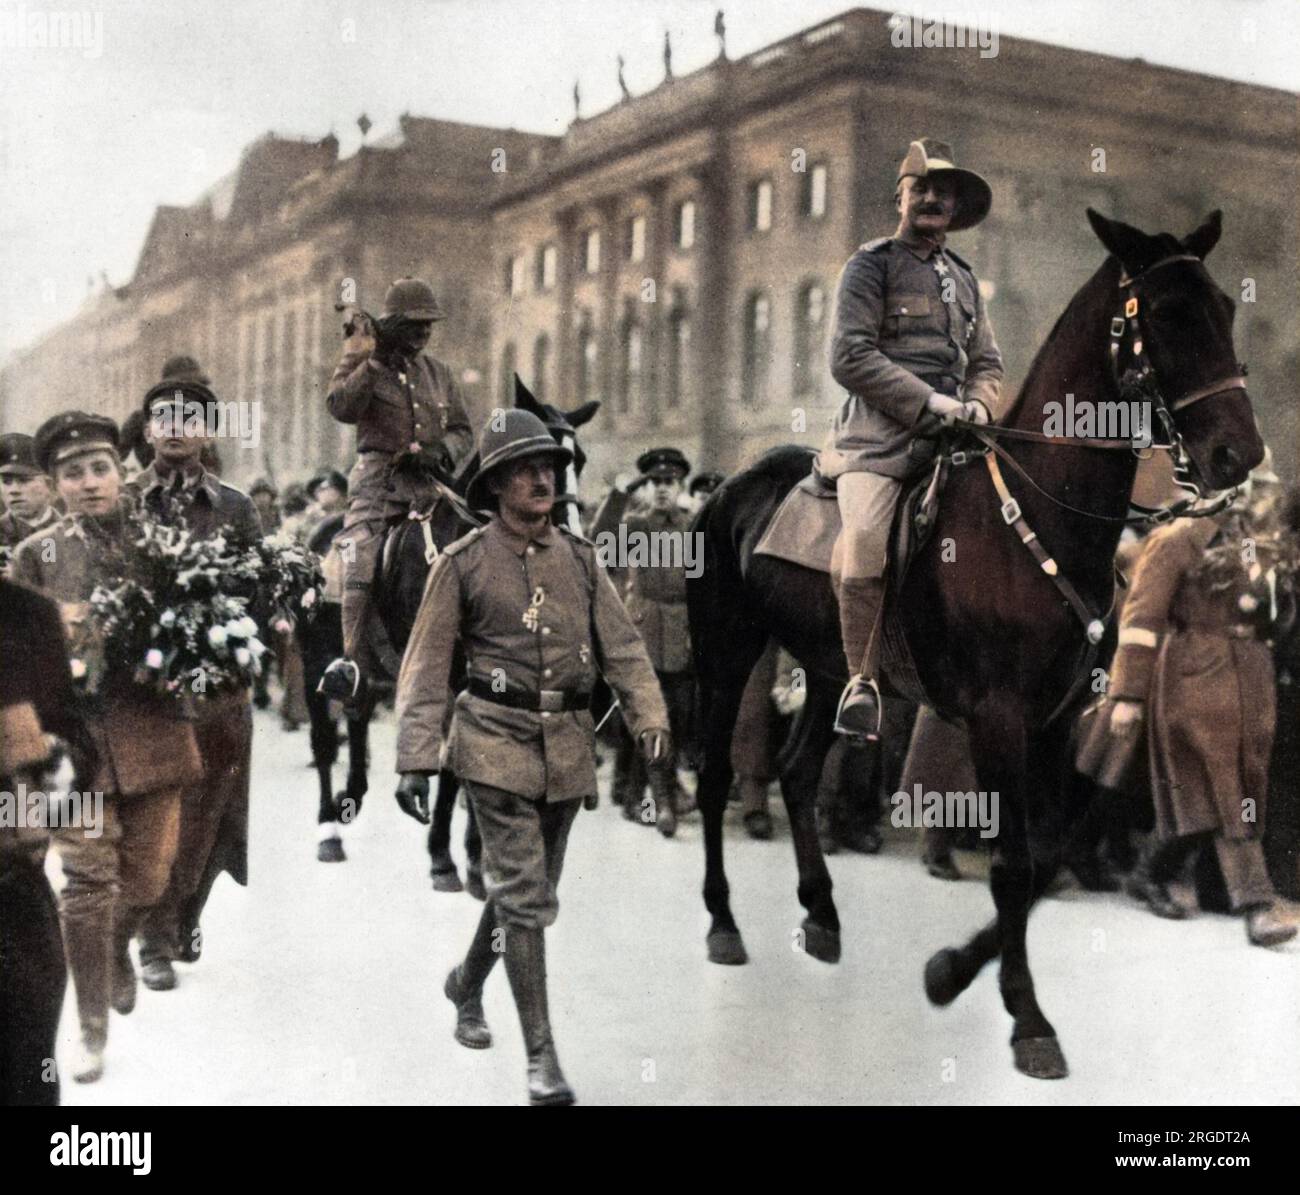 Paul Emil von Lettow-Vorbeck (1870-1964), general in the Imperial German Army and commander of the German East Africa Campaign during the First World War.  Seen here on horseback in a parade, returning to Berlin after the war. Stock Photo